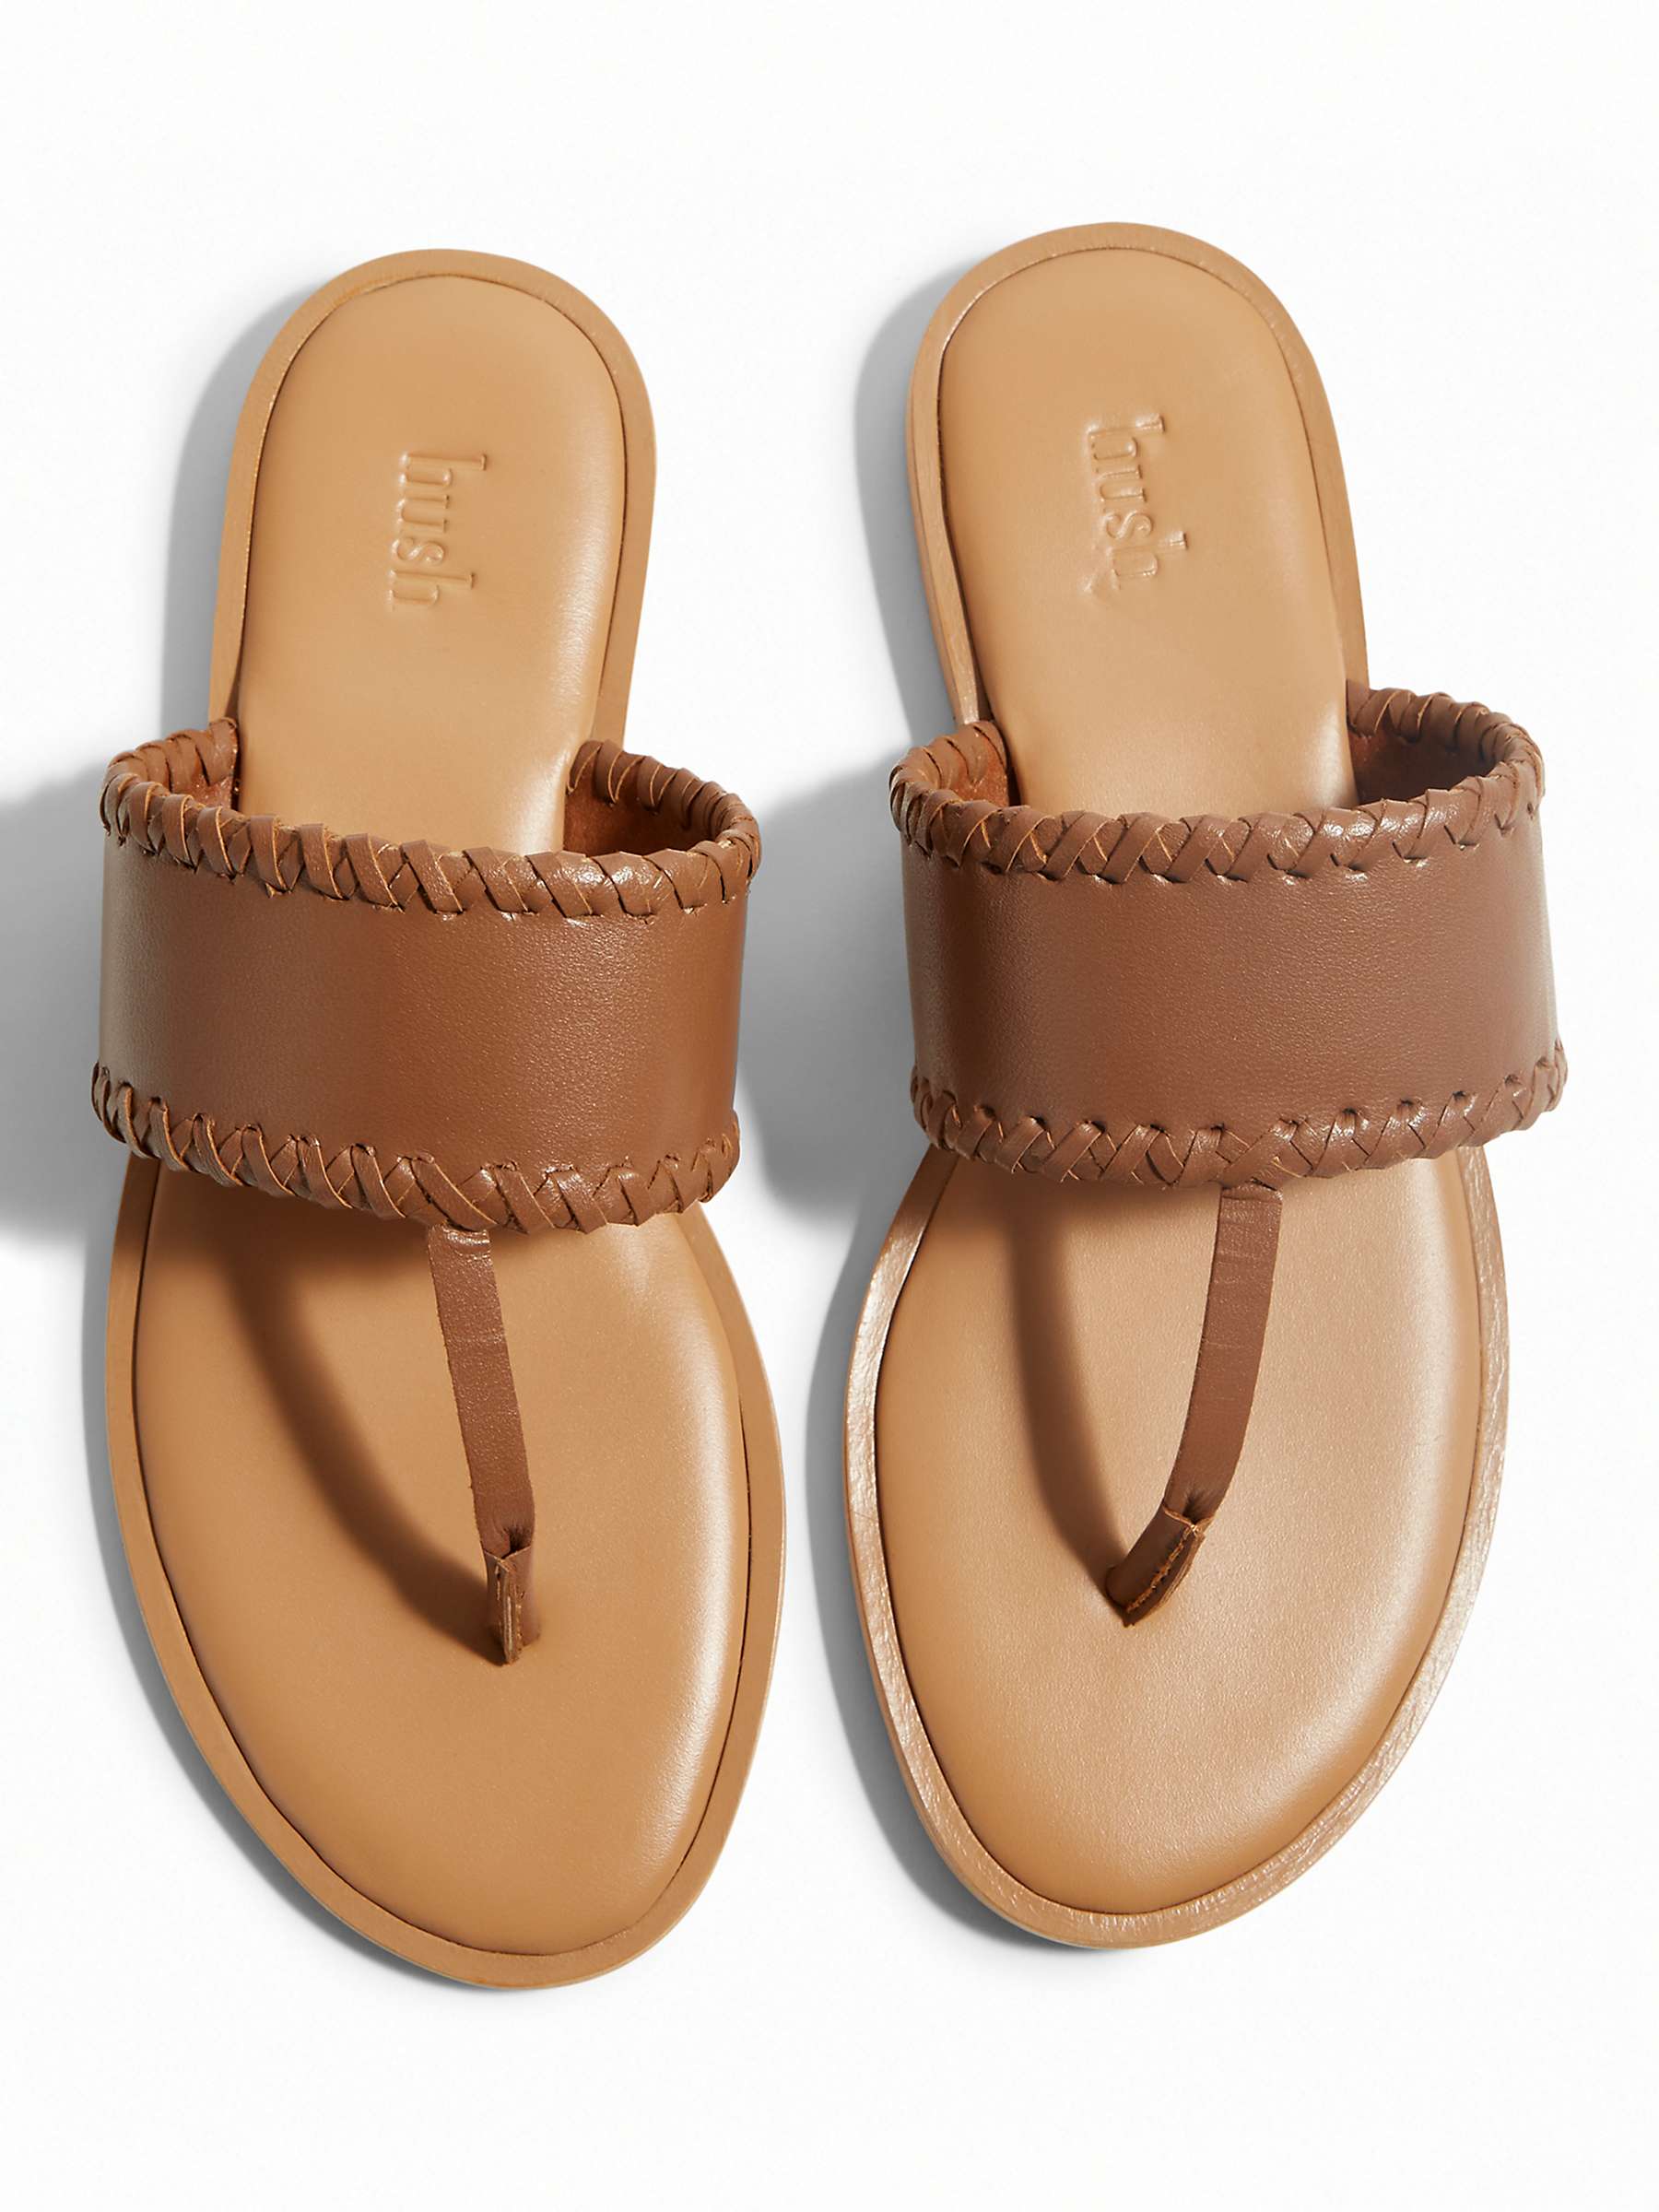 Buy HUSH Wilma Leather Whipstitch Sandals Online at johnlewis.com